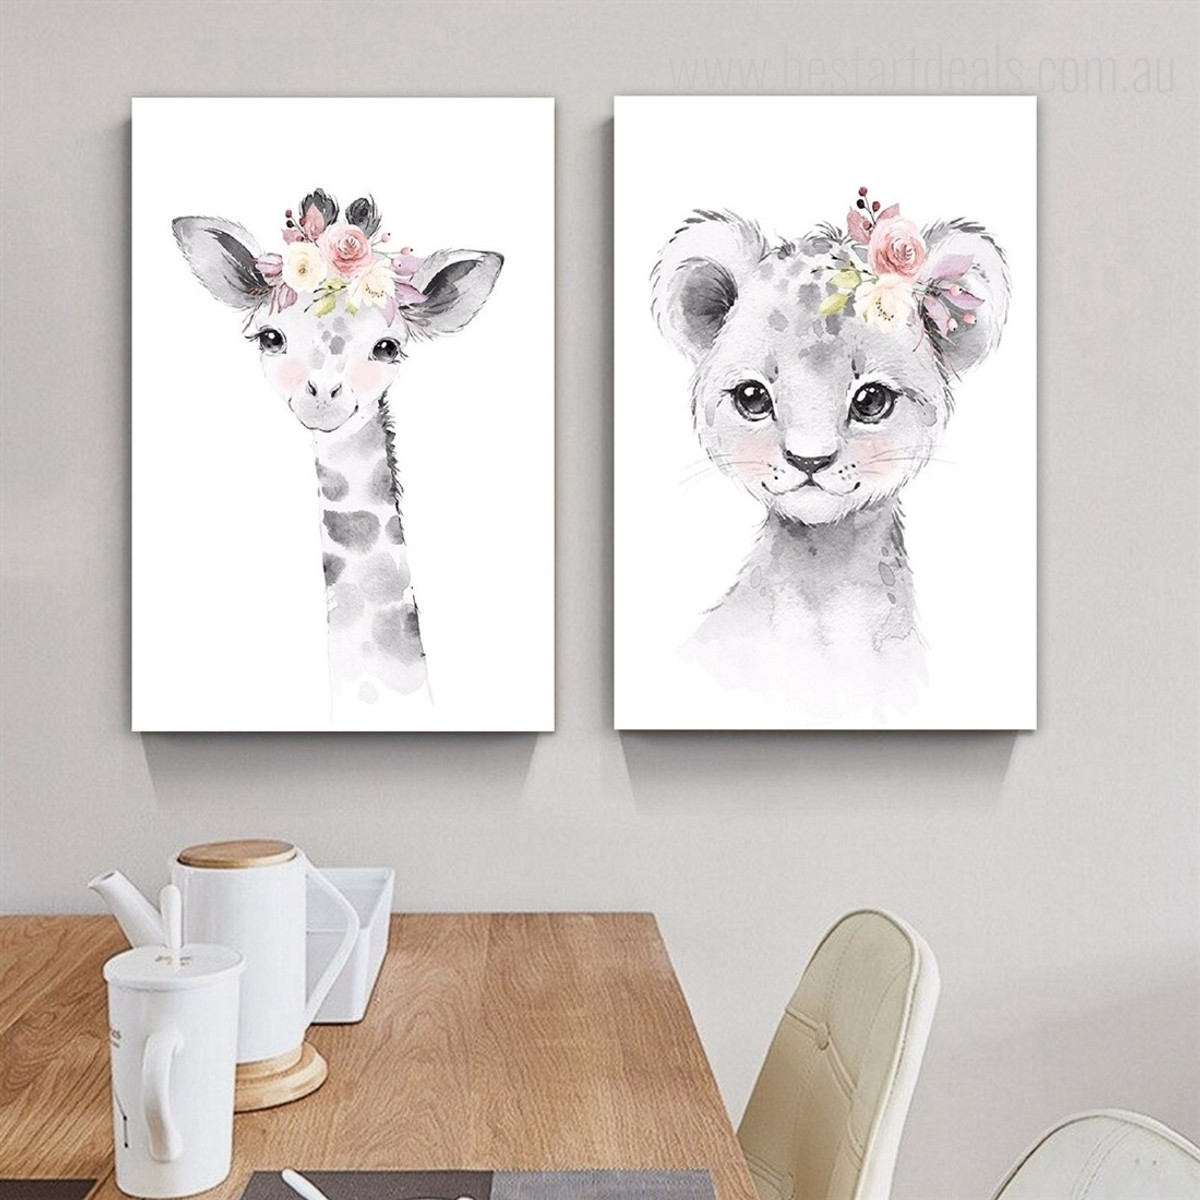 Calf And Cub Blooms Leaves Floral 2 Piece Animal Painting Sets Photograph Kids Nursery Stretched Canvas Print For Wall Hanging Illumination 